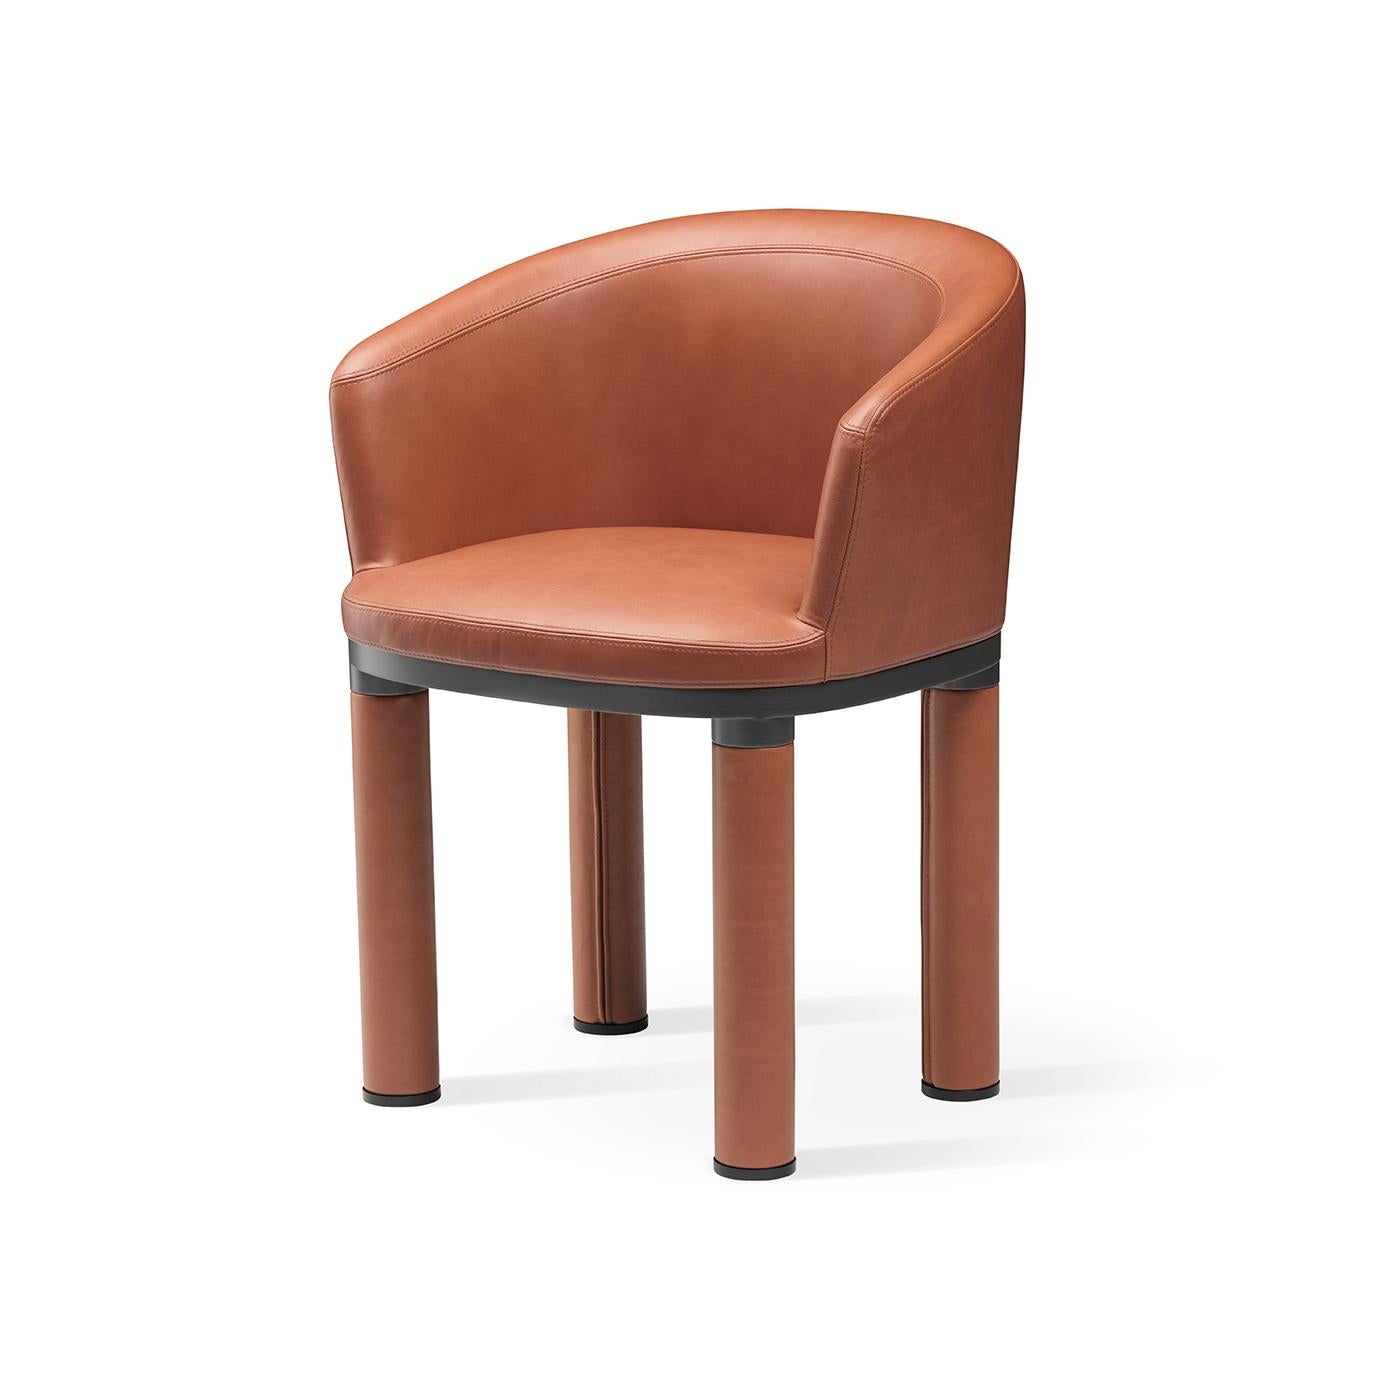 Sober and inviting, this stunning armchair flaunts a clean and essential design of minimalist style. Defined by soft and curved lines, it rests on a brass structure upholstered on the legs and on the welcoming seat with fine Napa leather showcasing